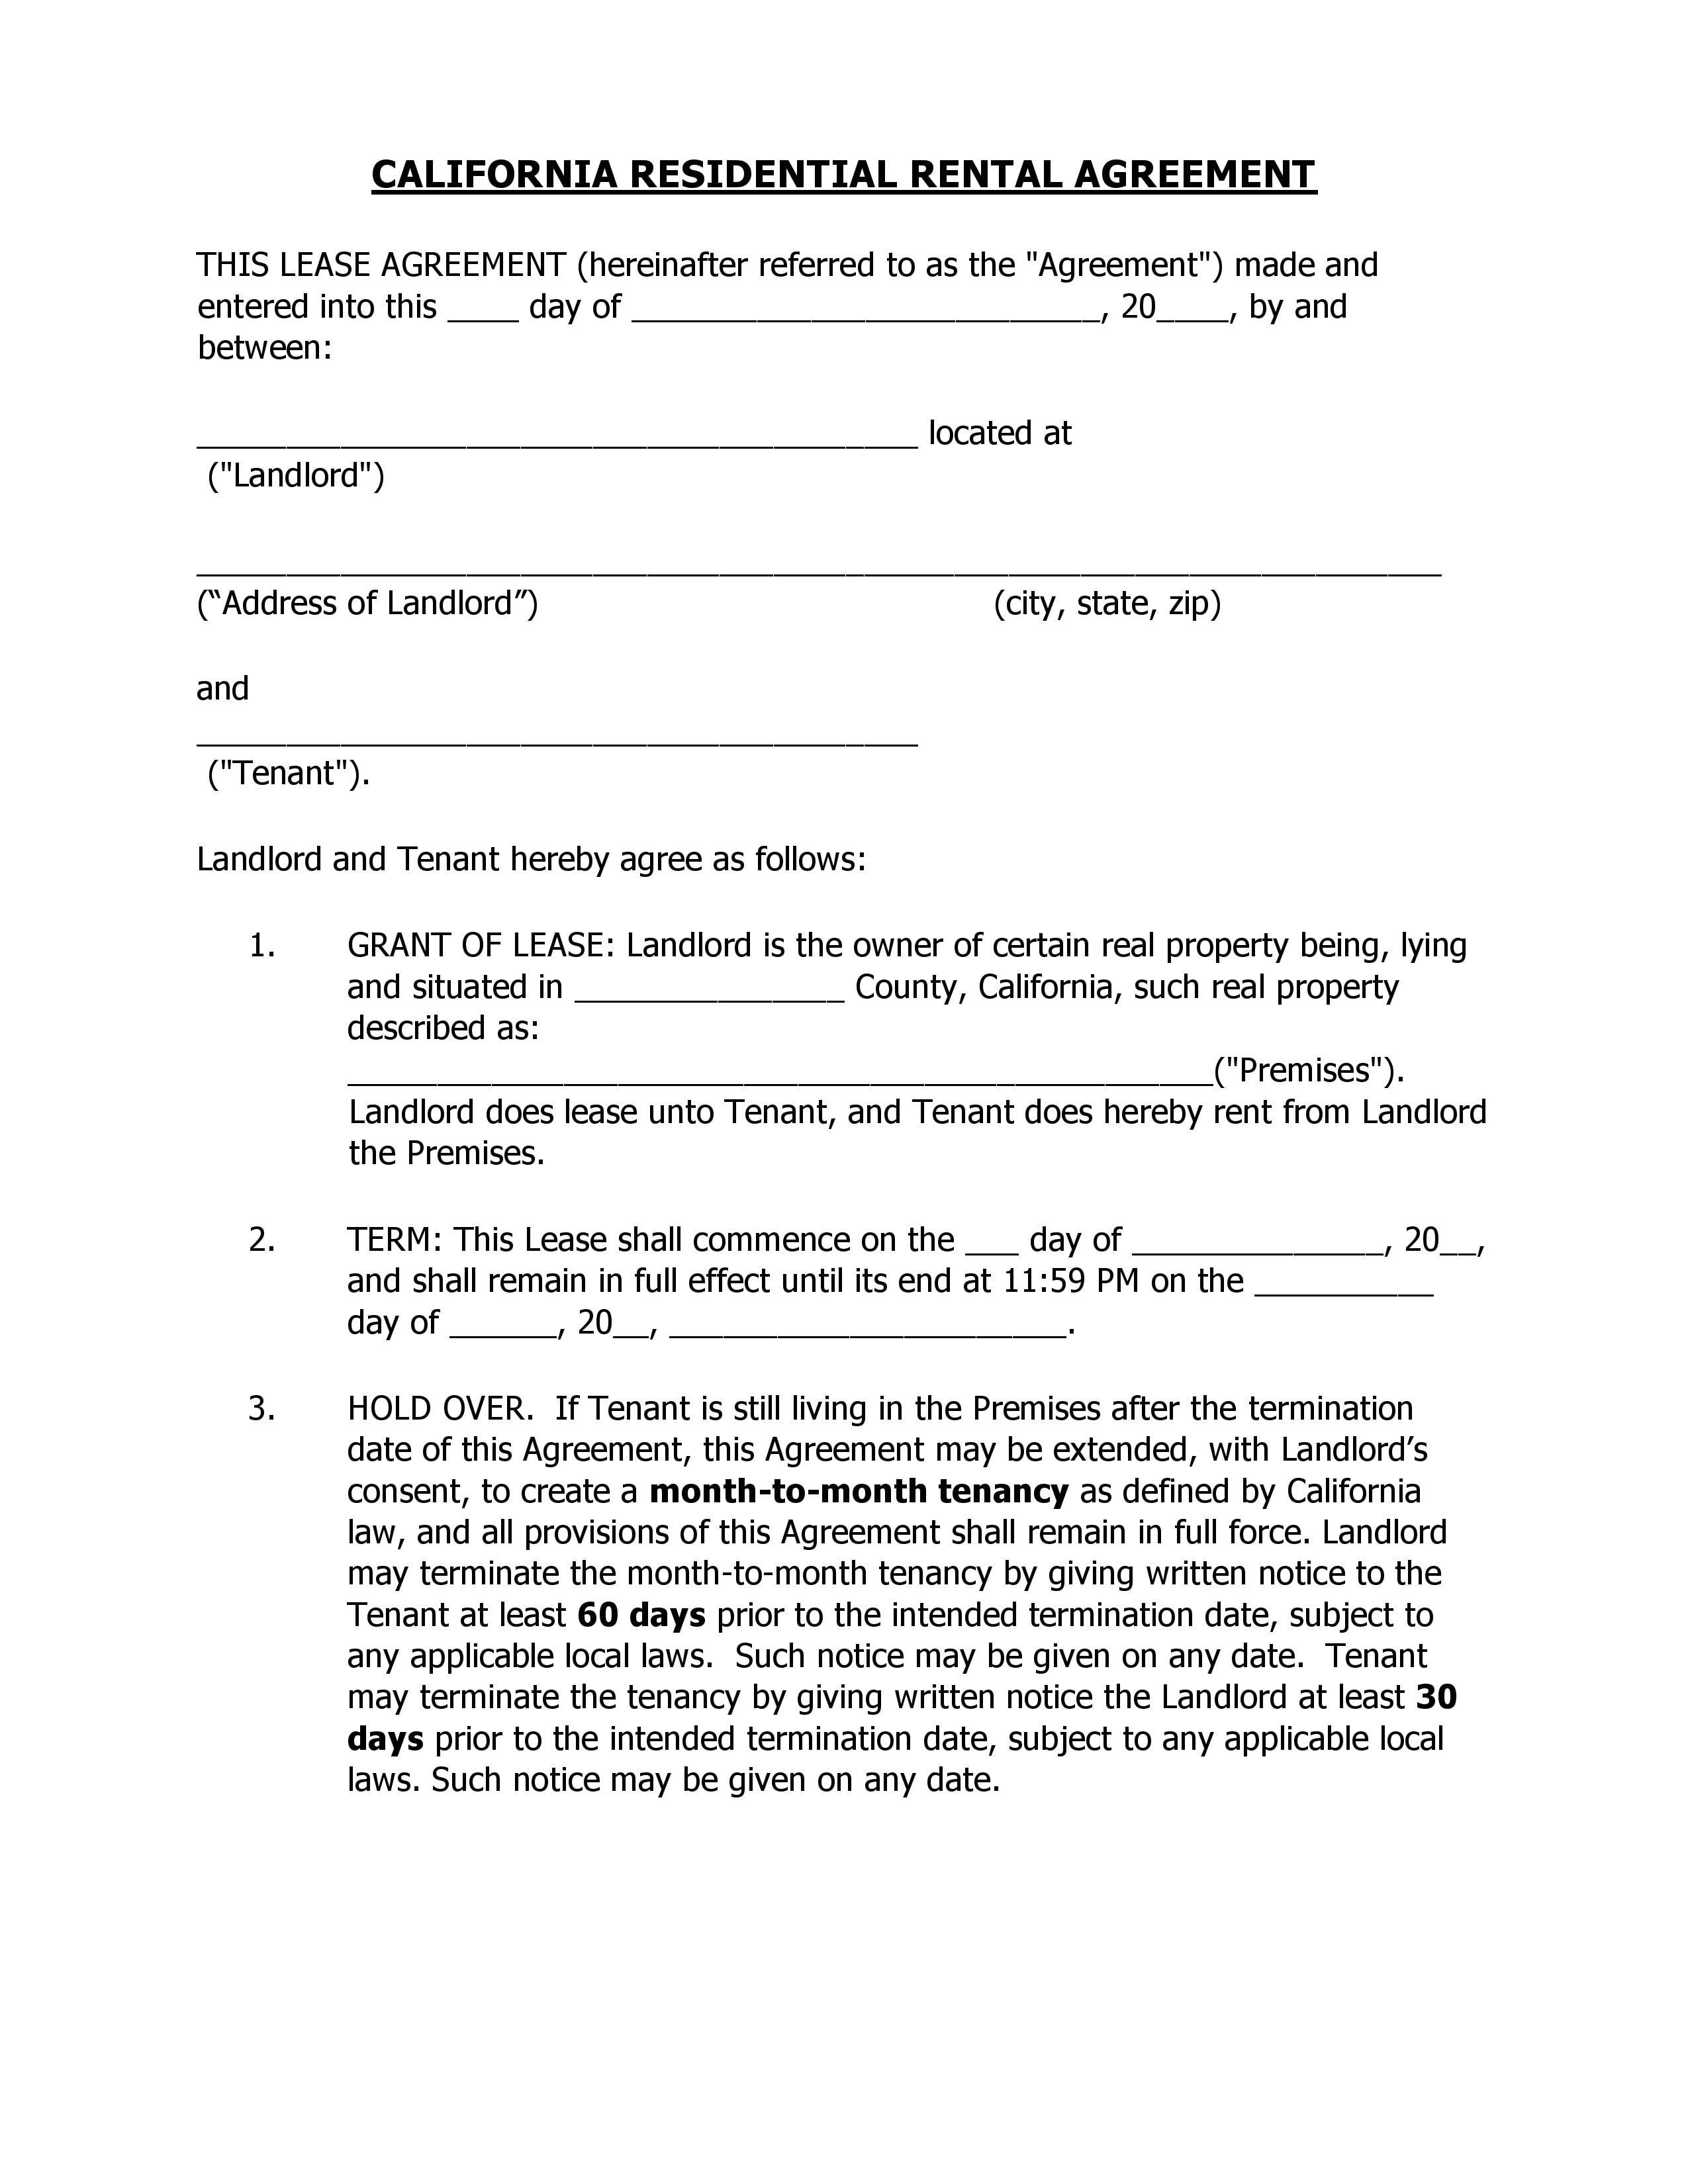 download-free-california-residential-rental-agreement-printable-lease-agreement